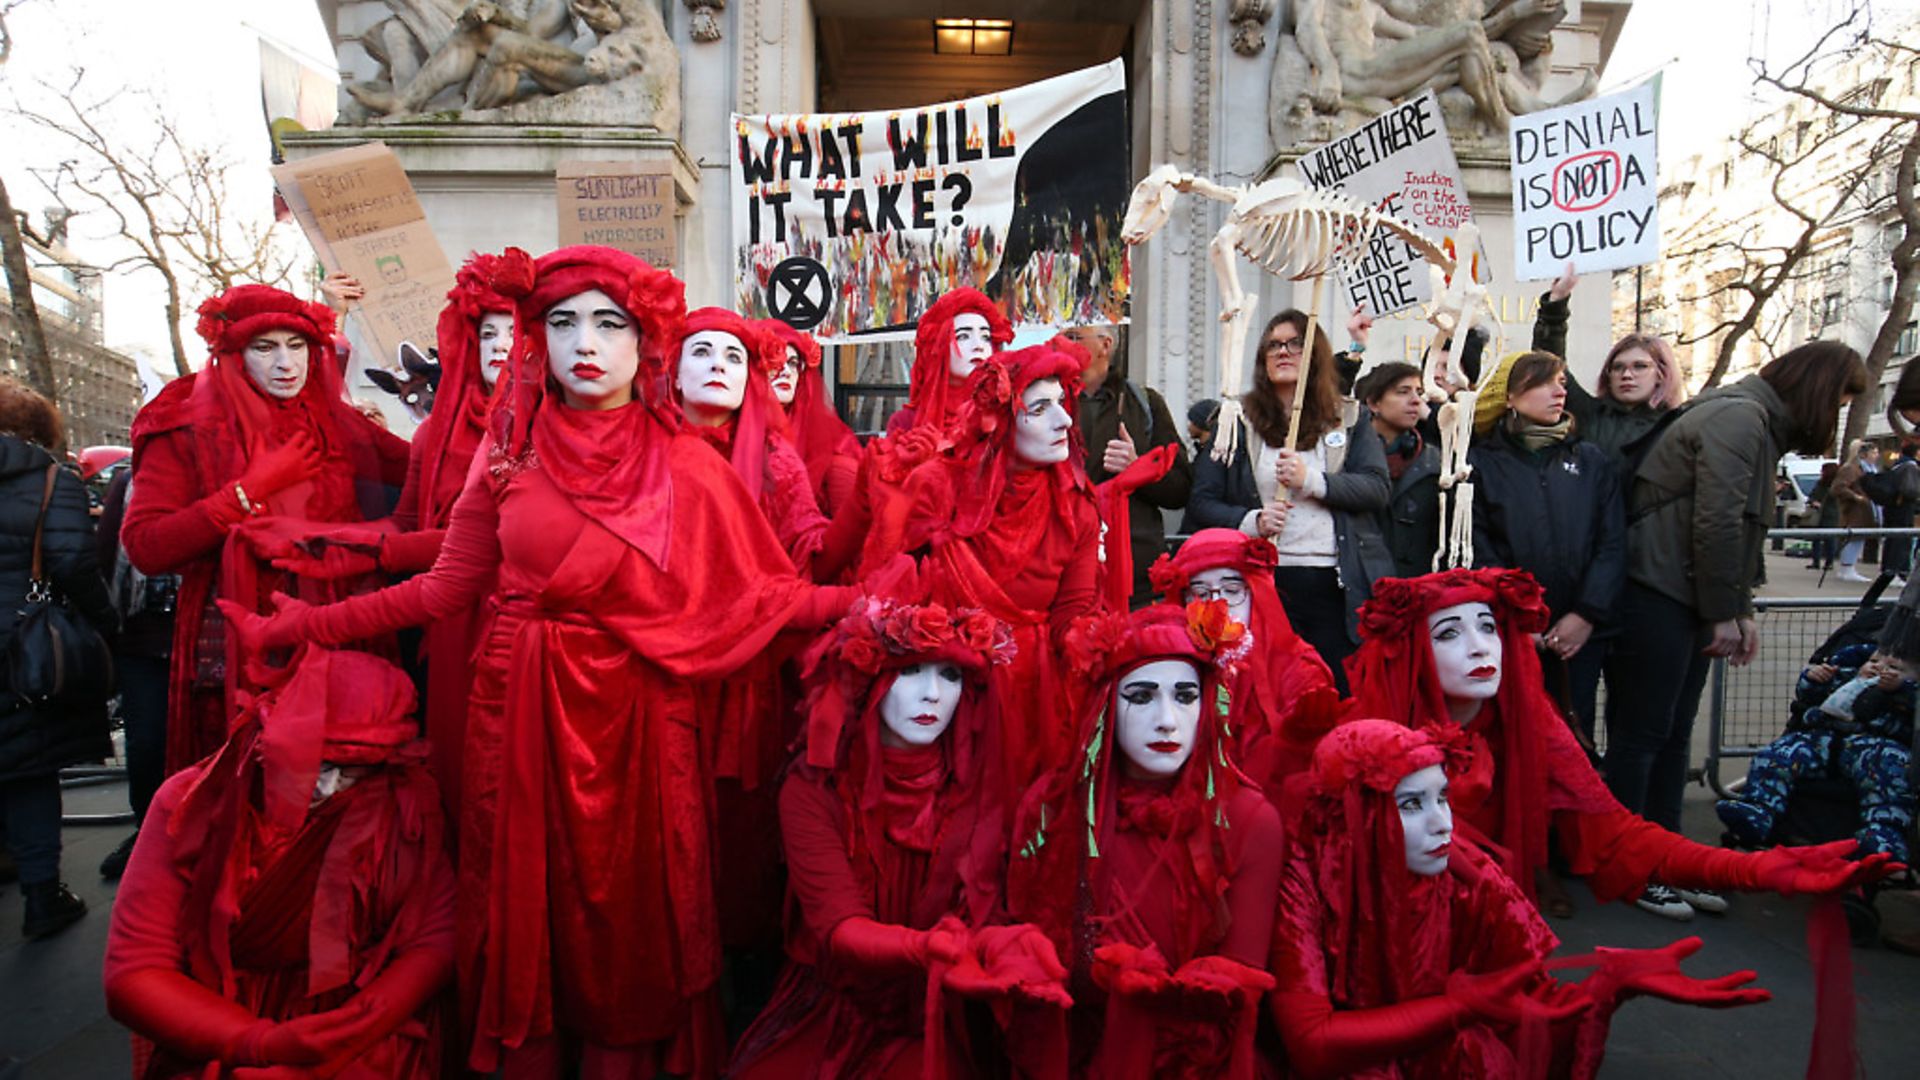 The Red Rebels join climate change protesters outside the Australian Embassy in London, where Extinction Rebellion are staging a protest against the Australian government's response to the wildfires in Australia. Photograph: Jonathan Brady/PA Wire. - Credit: PA